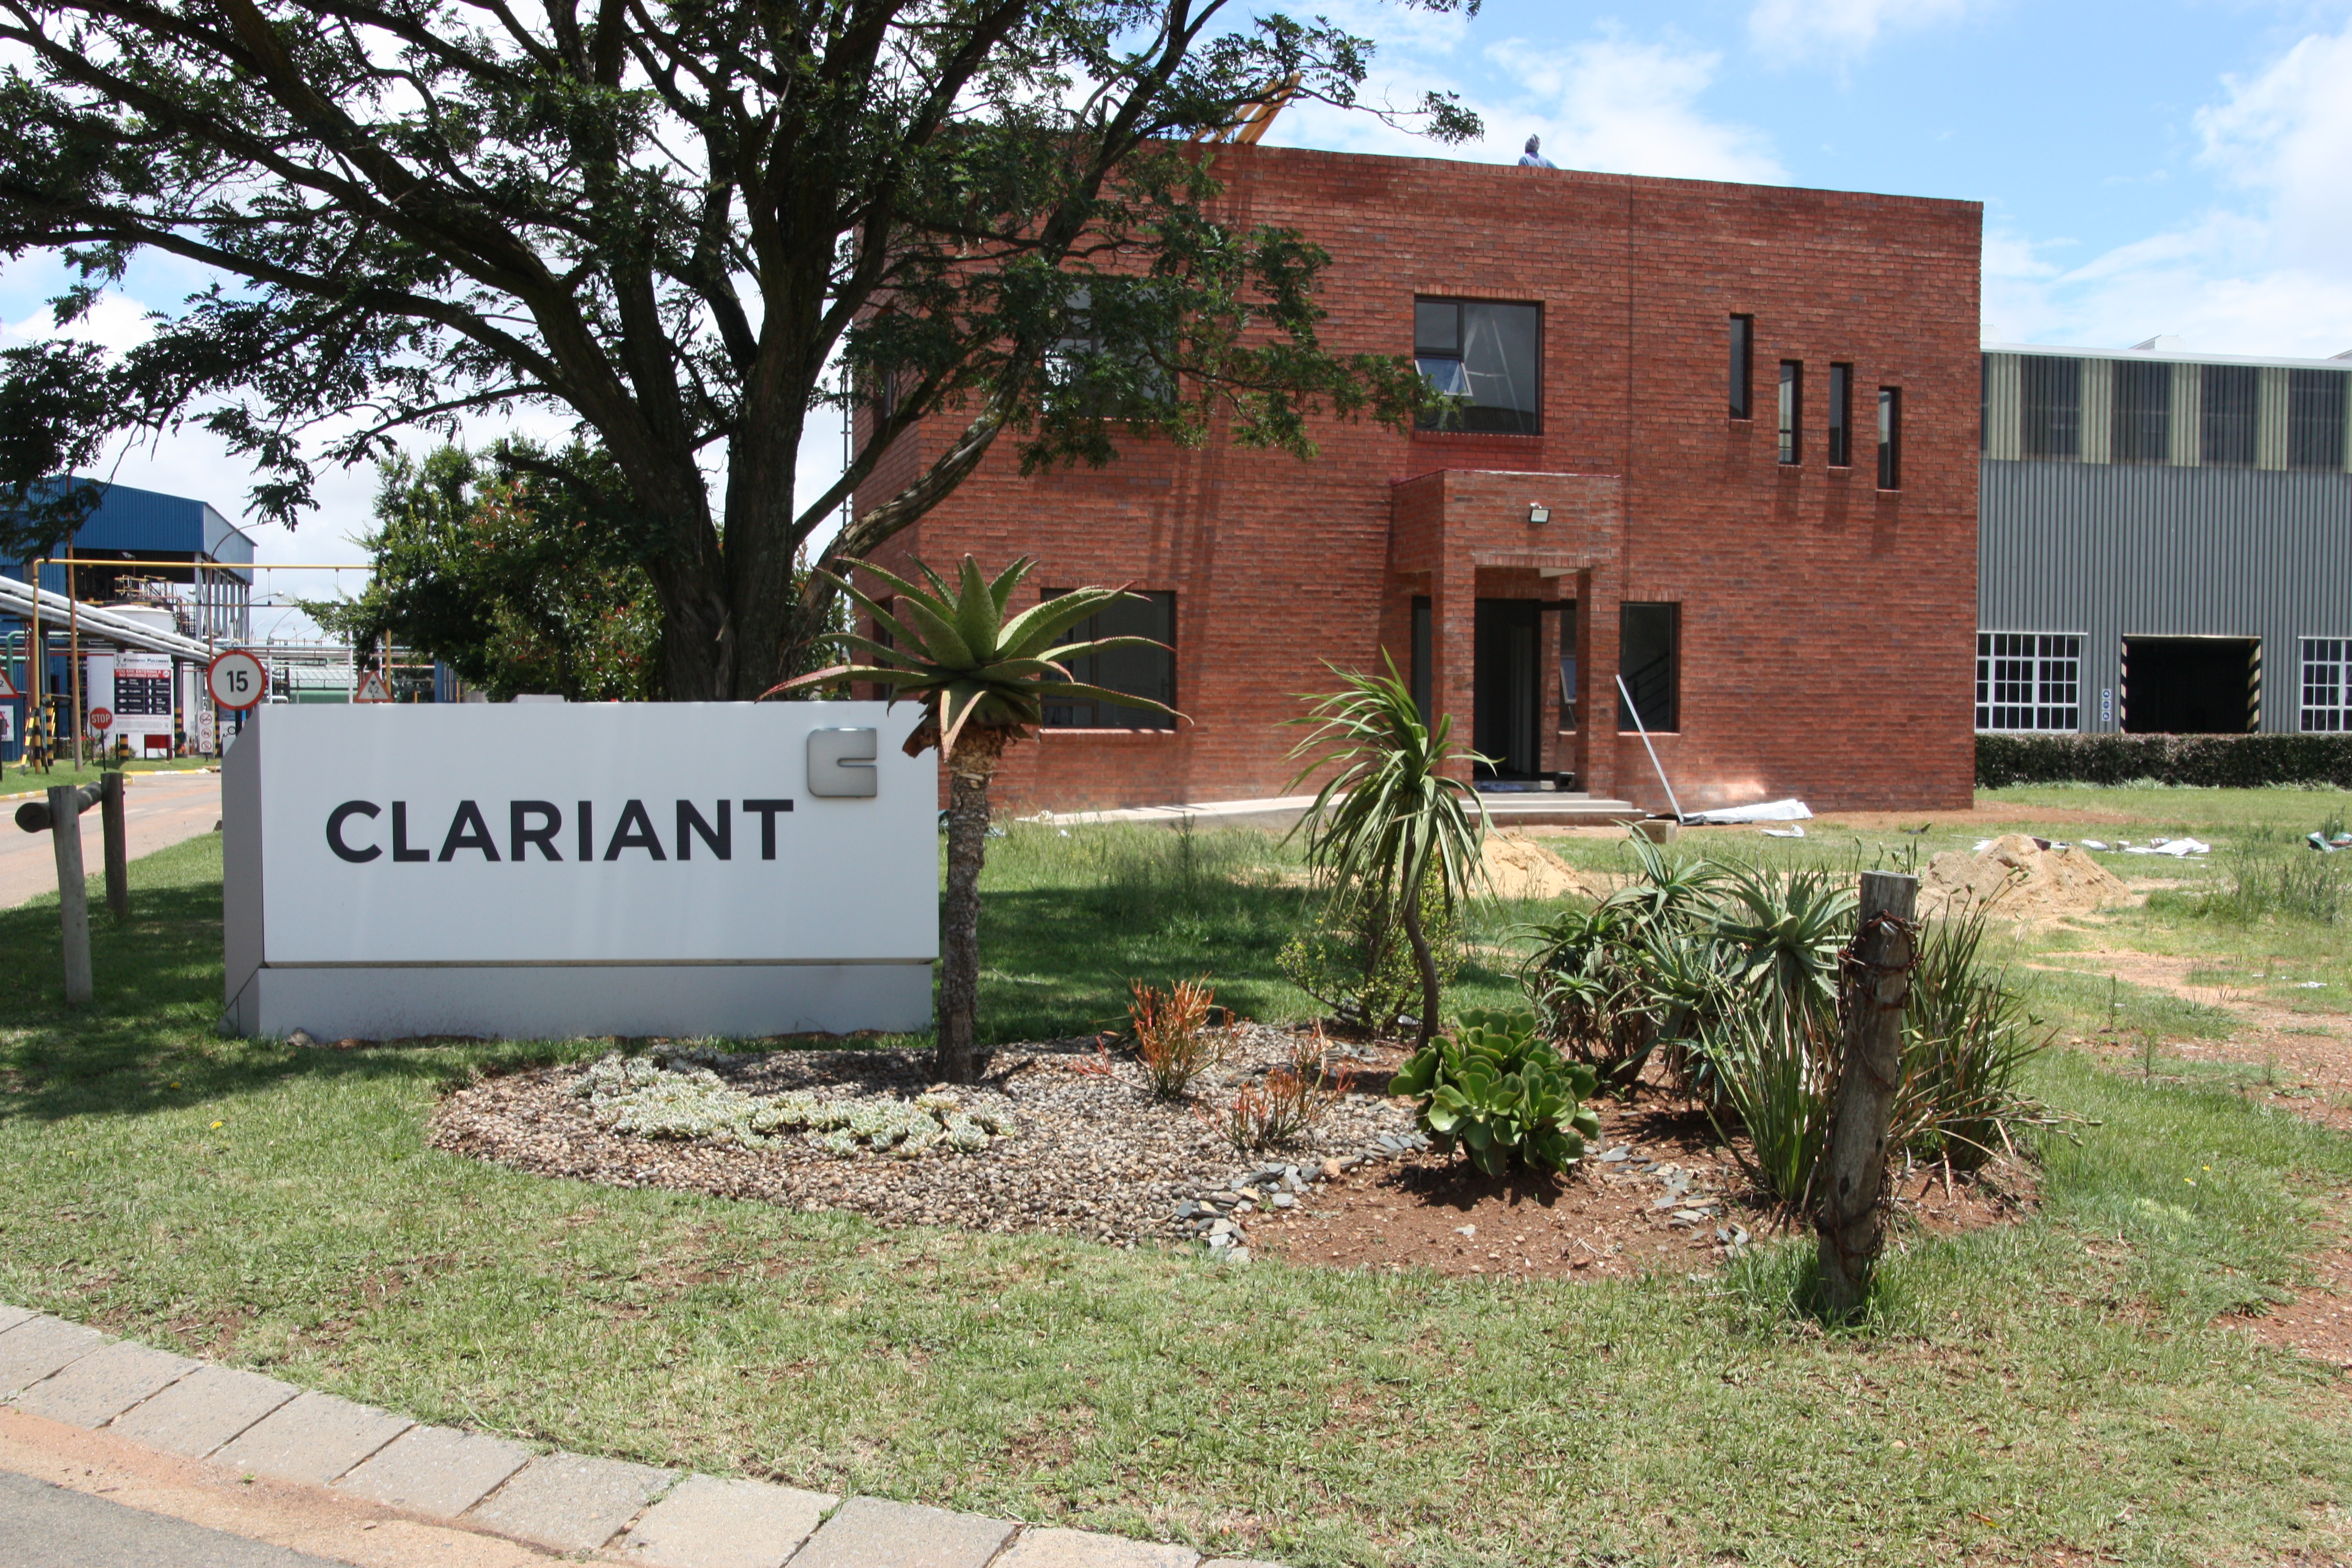 Clariant's new laboratory in Krugersdorp, South Africa. 
(Photo: Clariant)